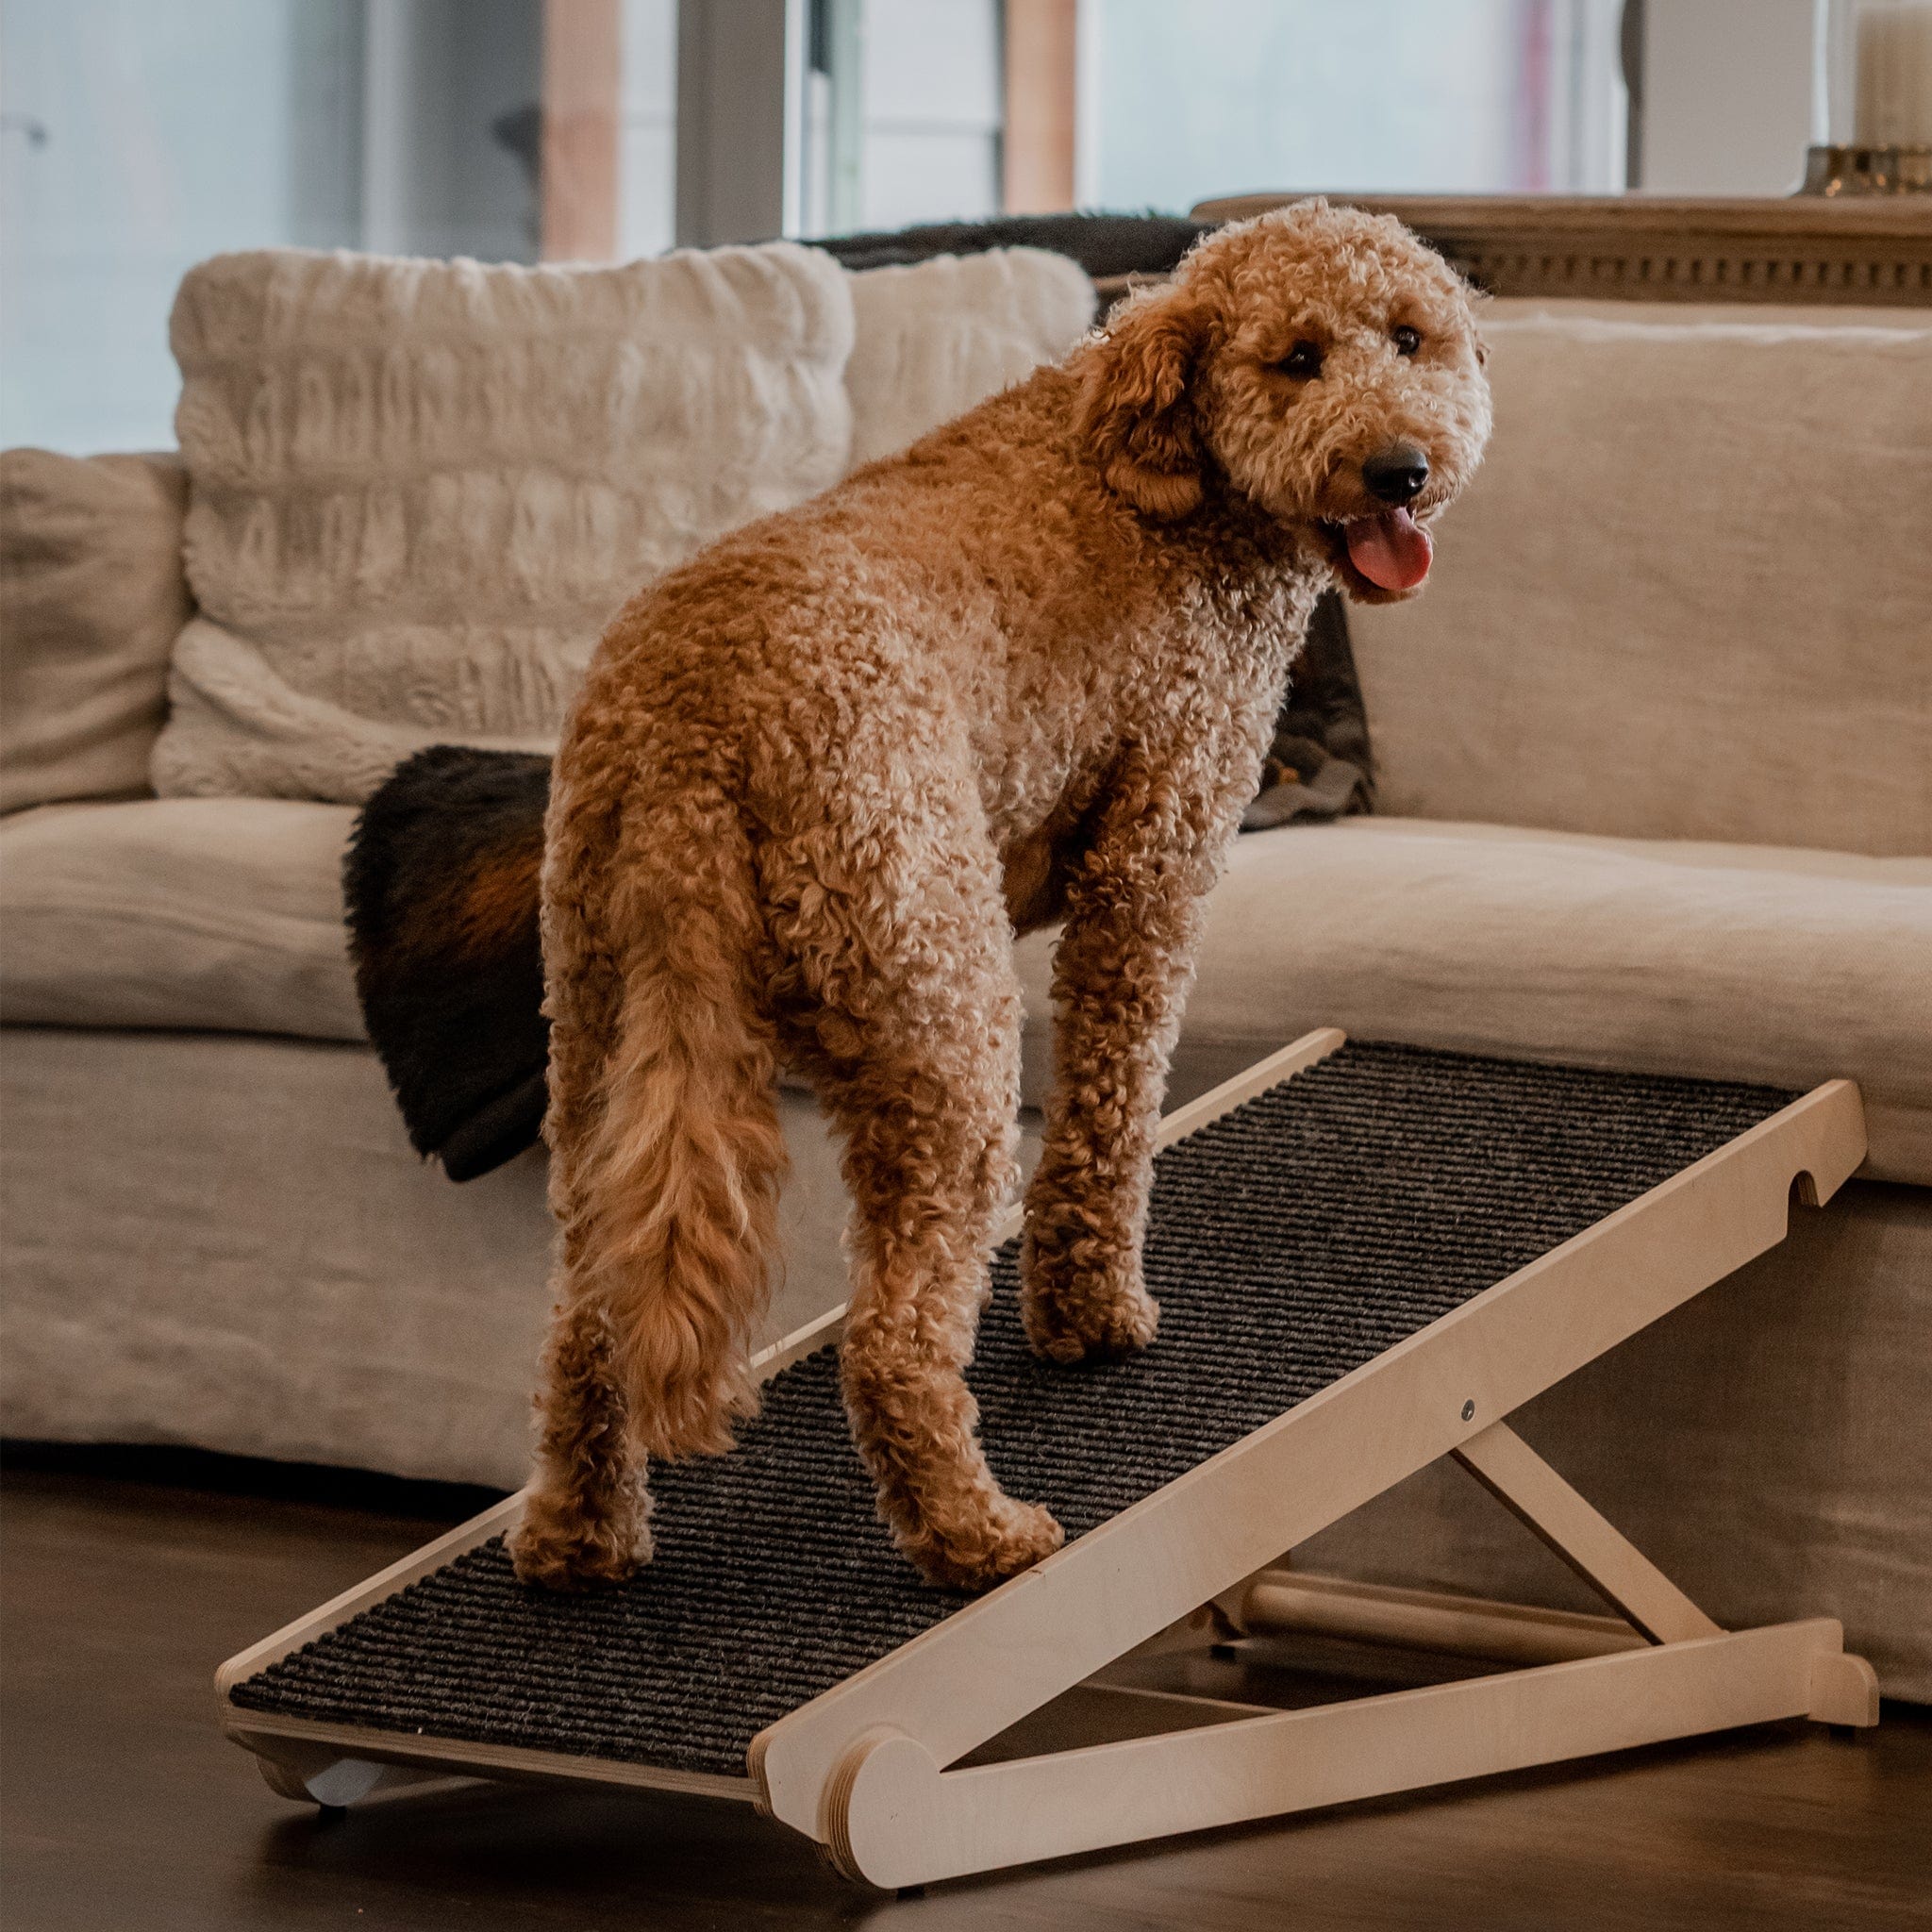 USA Made Dog Ramp For Bed or Couch - Adjustable from 14" to 24" Inches - Holds Over 200LBS -  For Small or Large Dogs